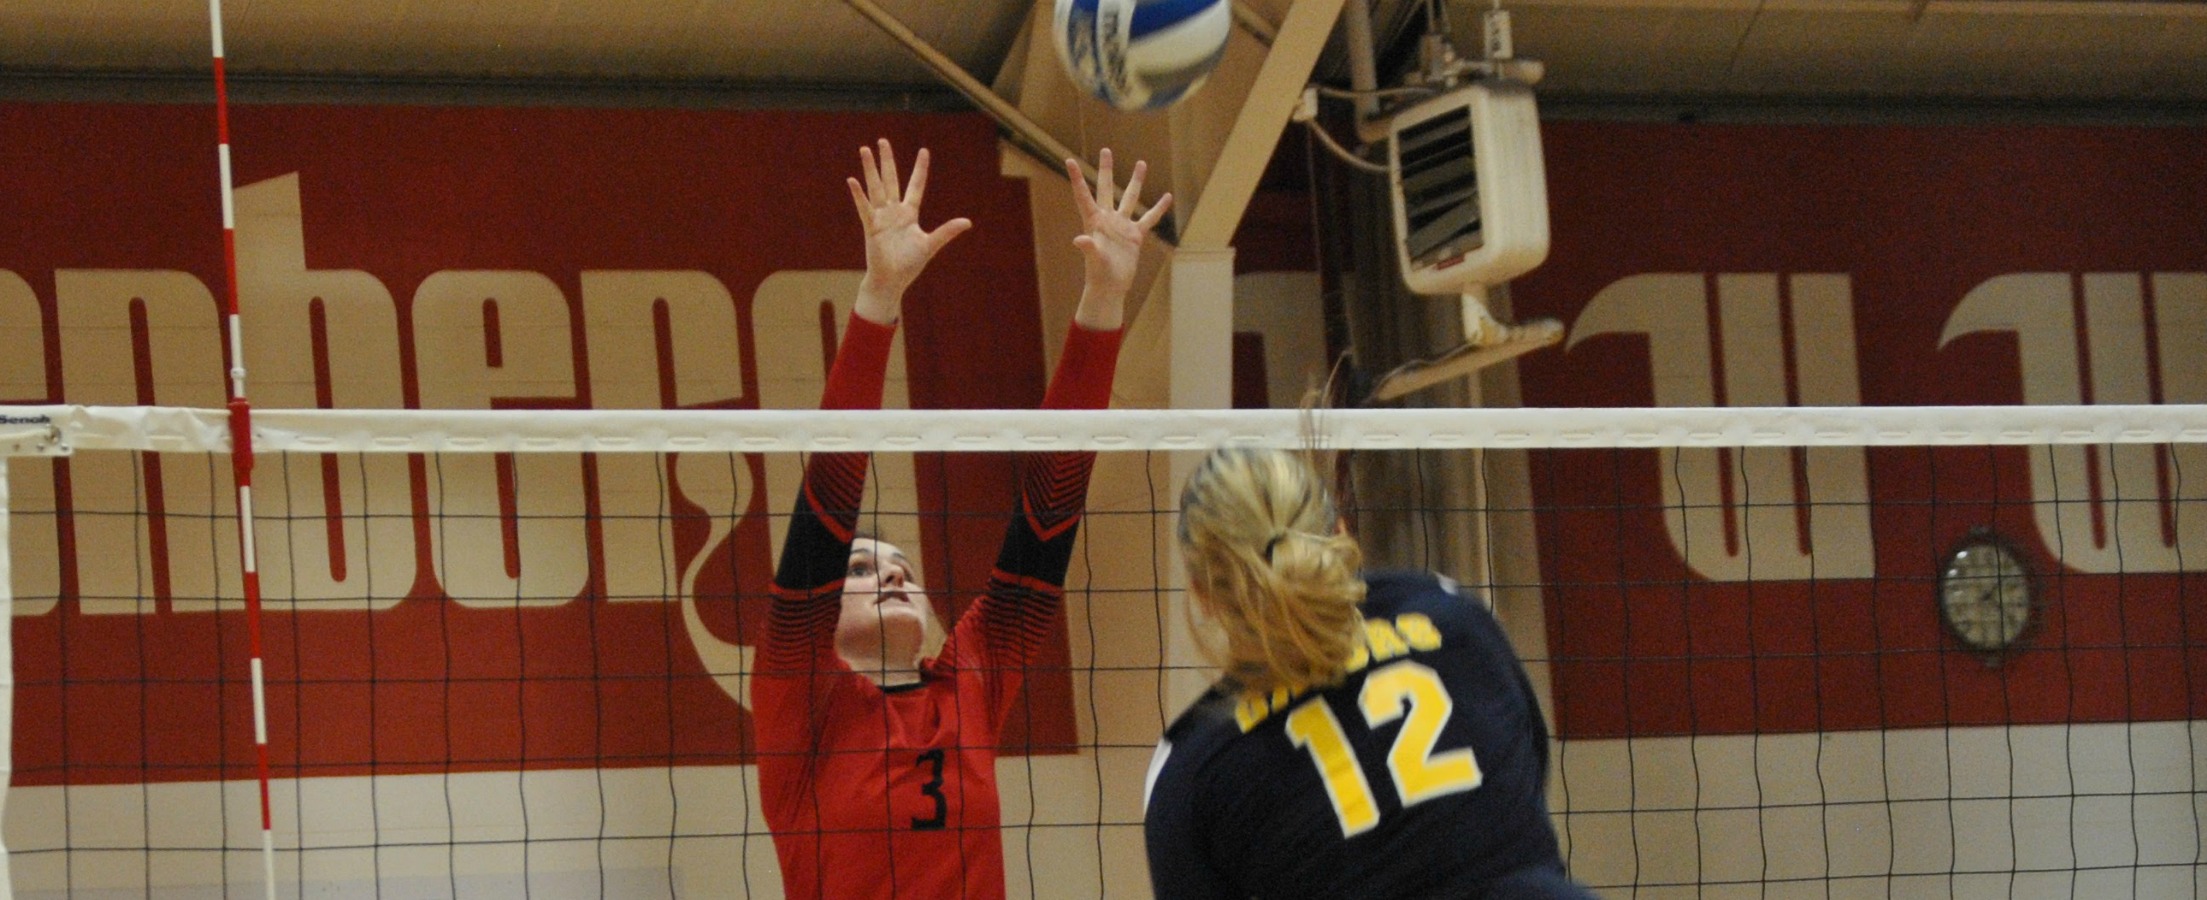 #6 Wittenberg Improves to 2-0 in NCAC Play with 3-0 Win Over Allegheny